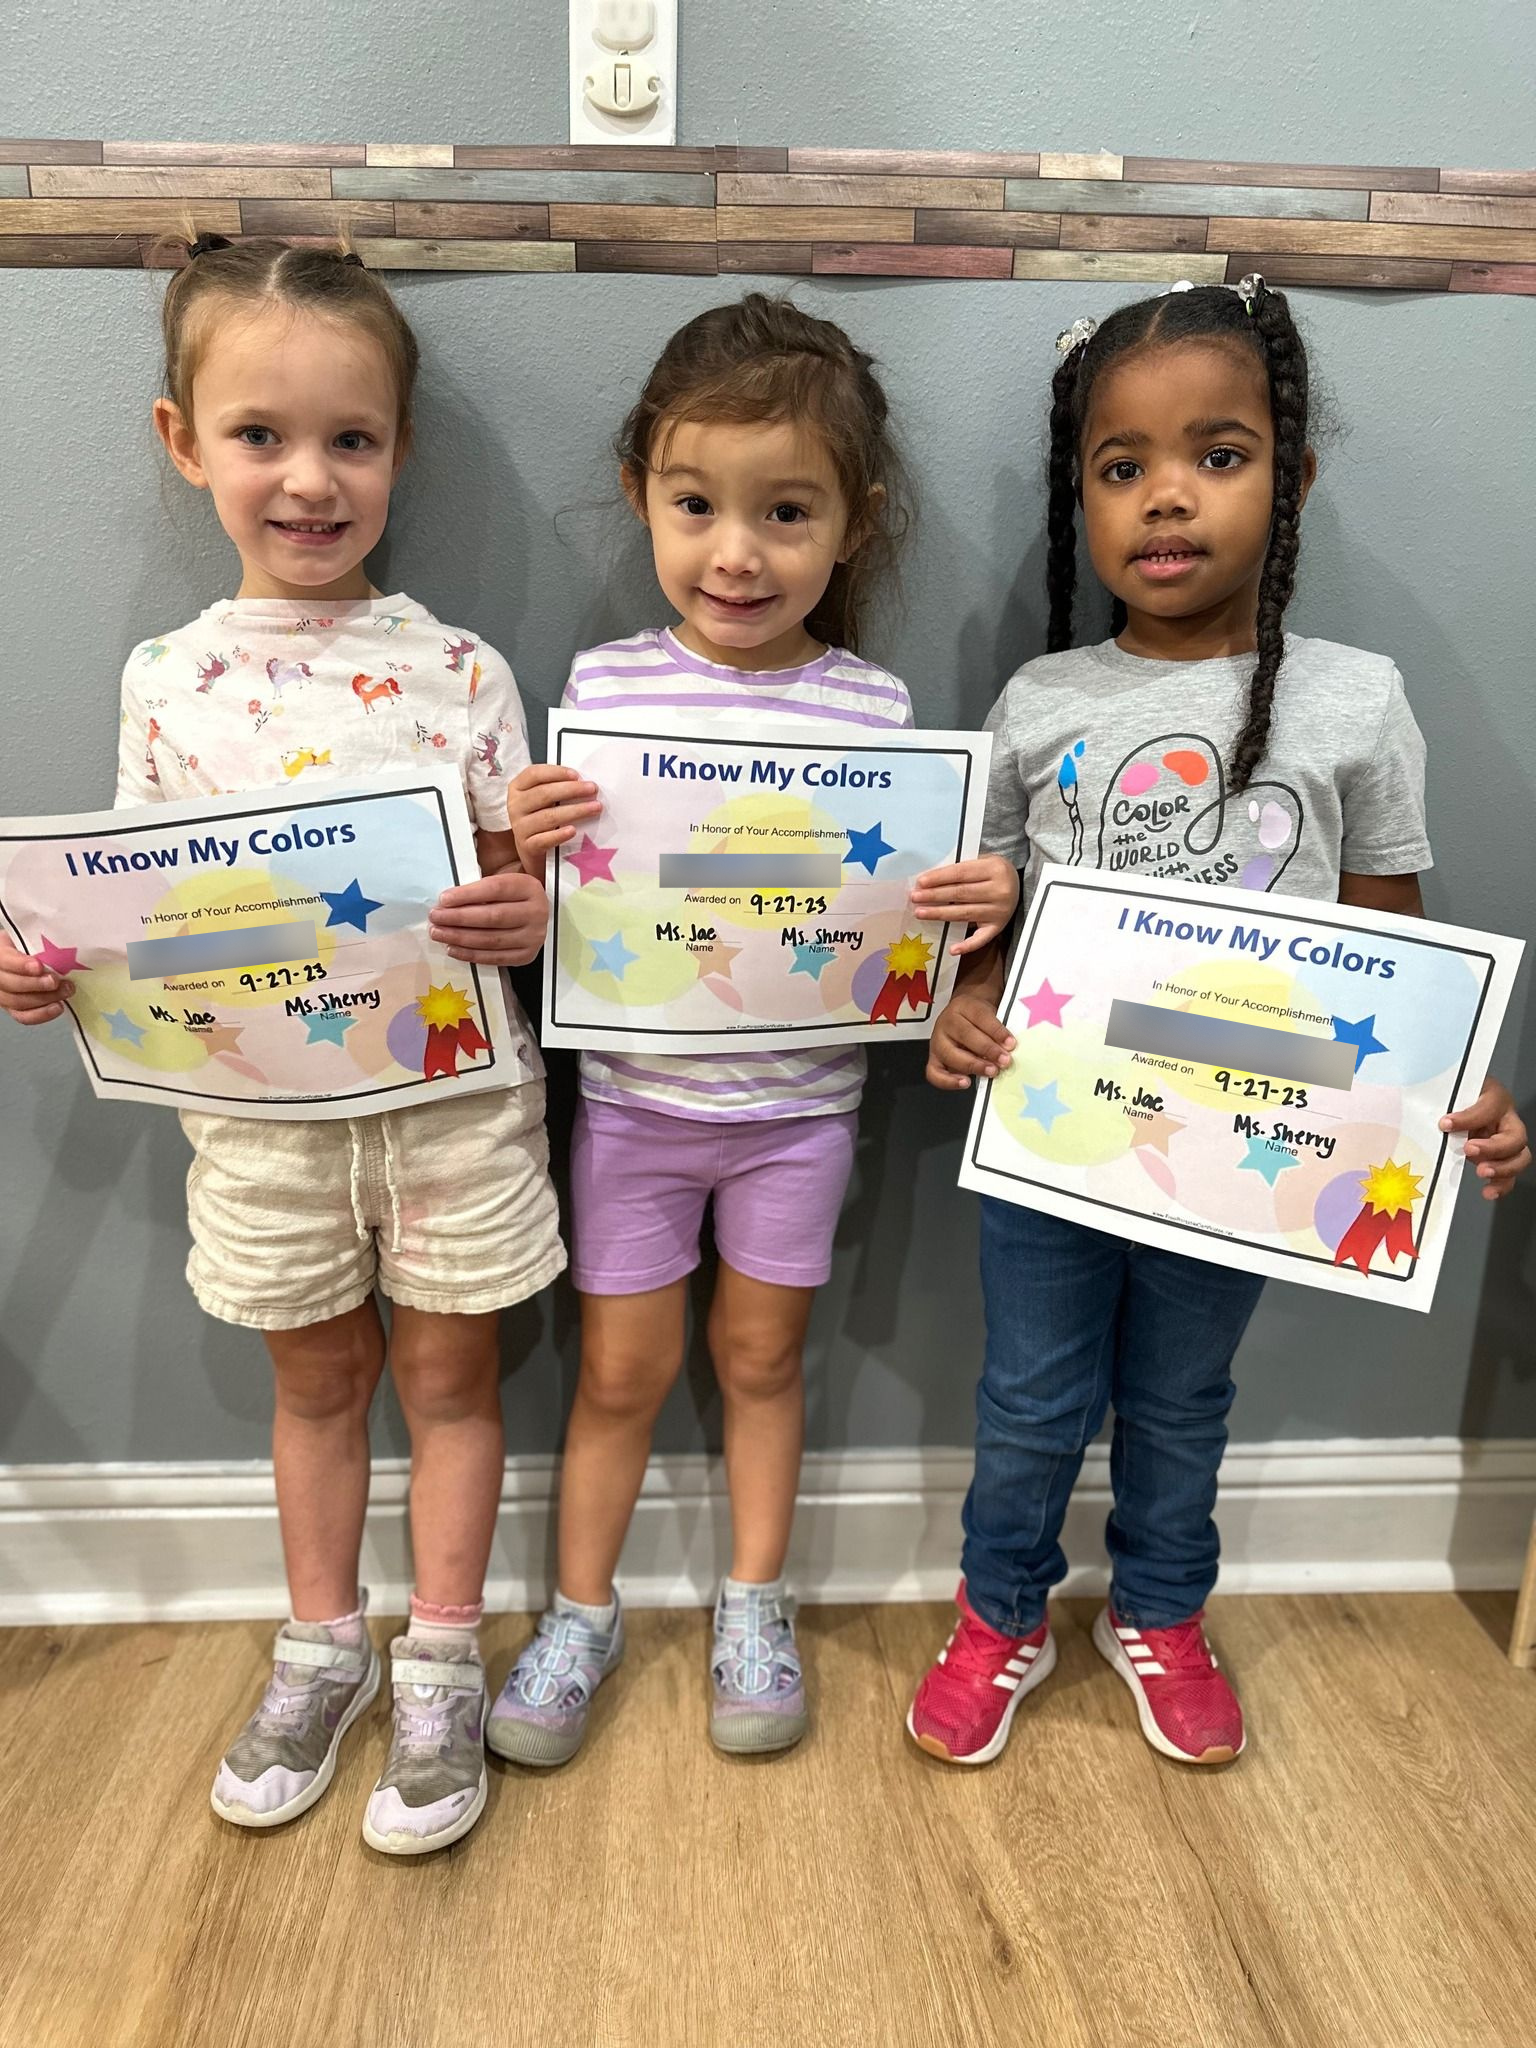 three little girls are standing next to each other holding certificates